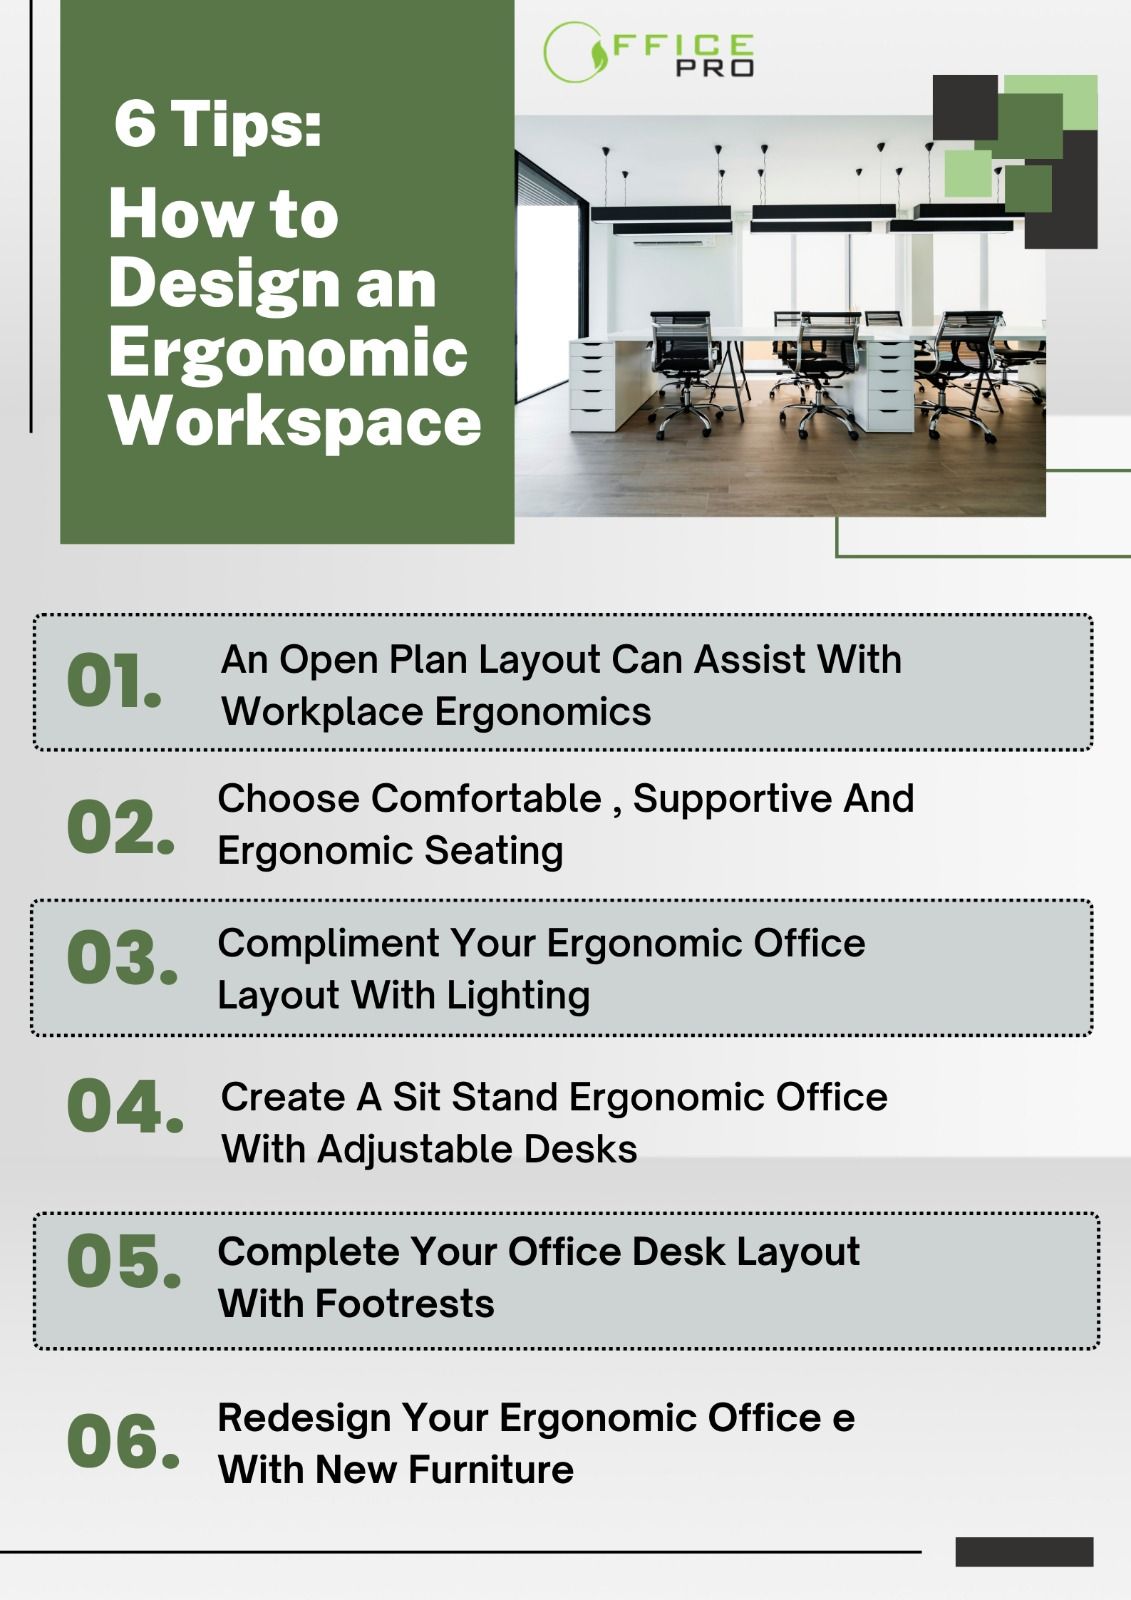 How To Design An Ergonomic Workspace